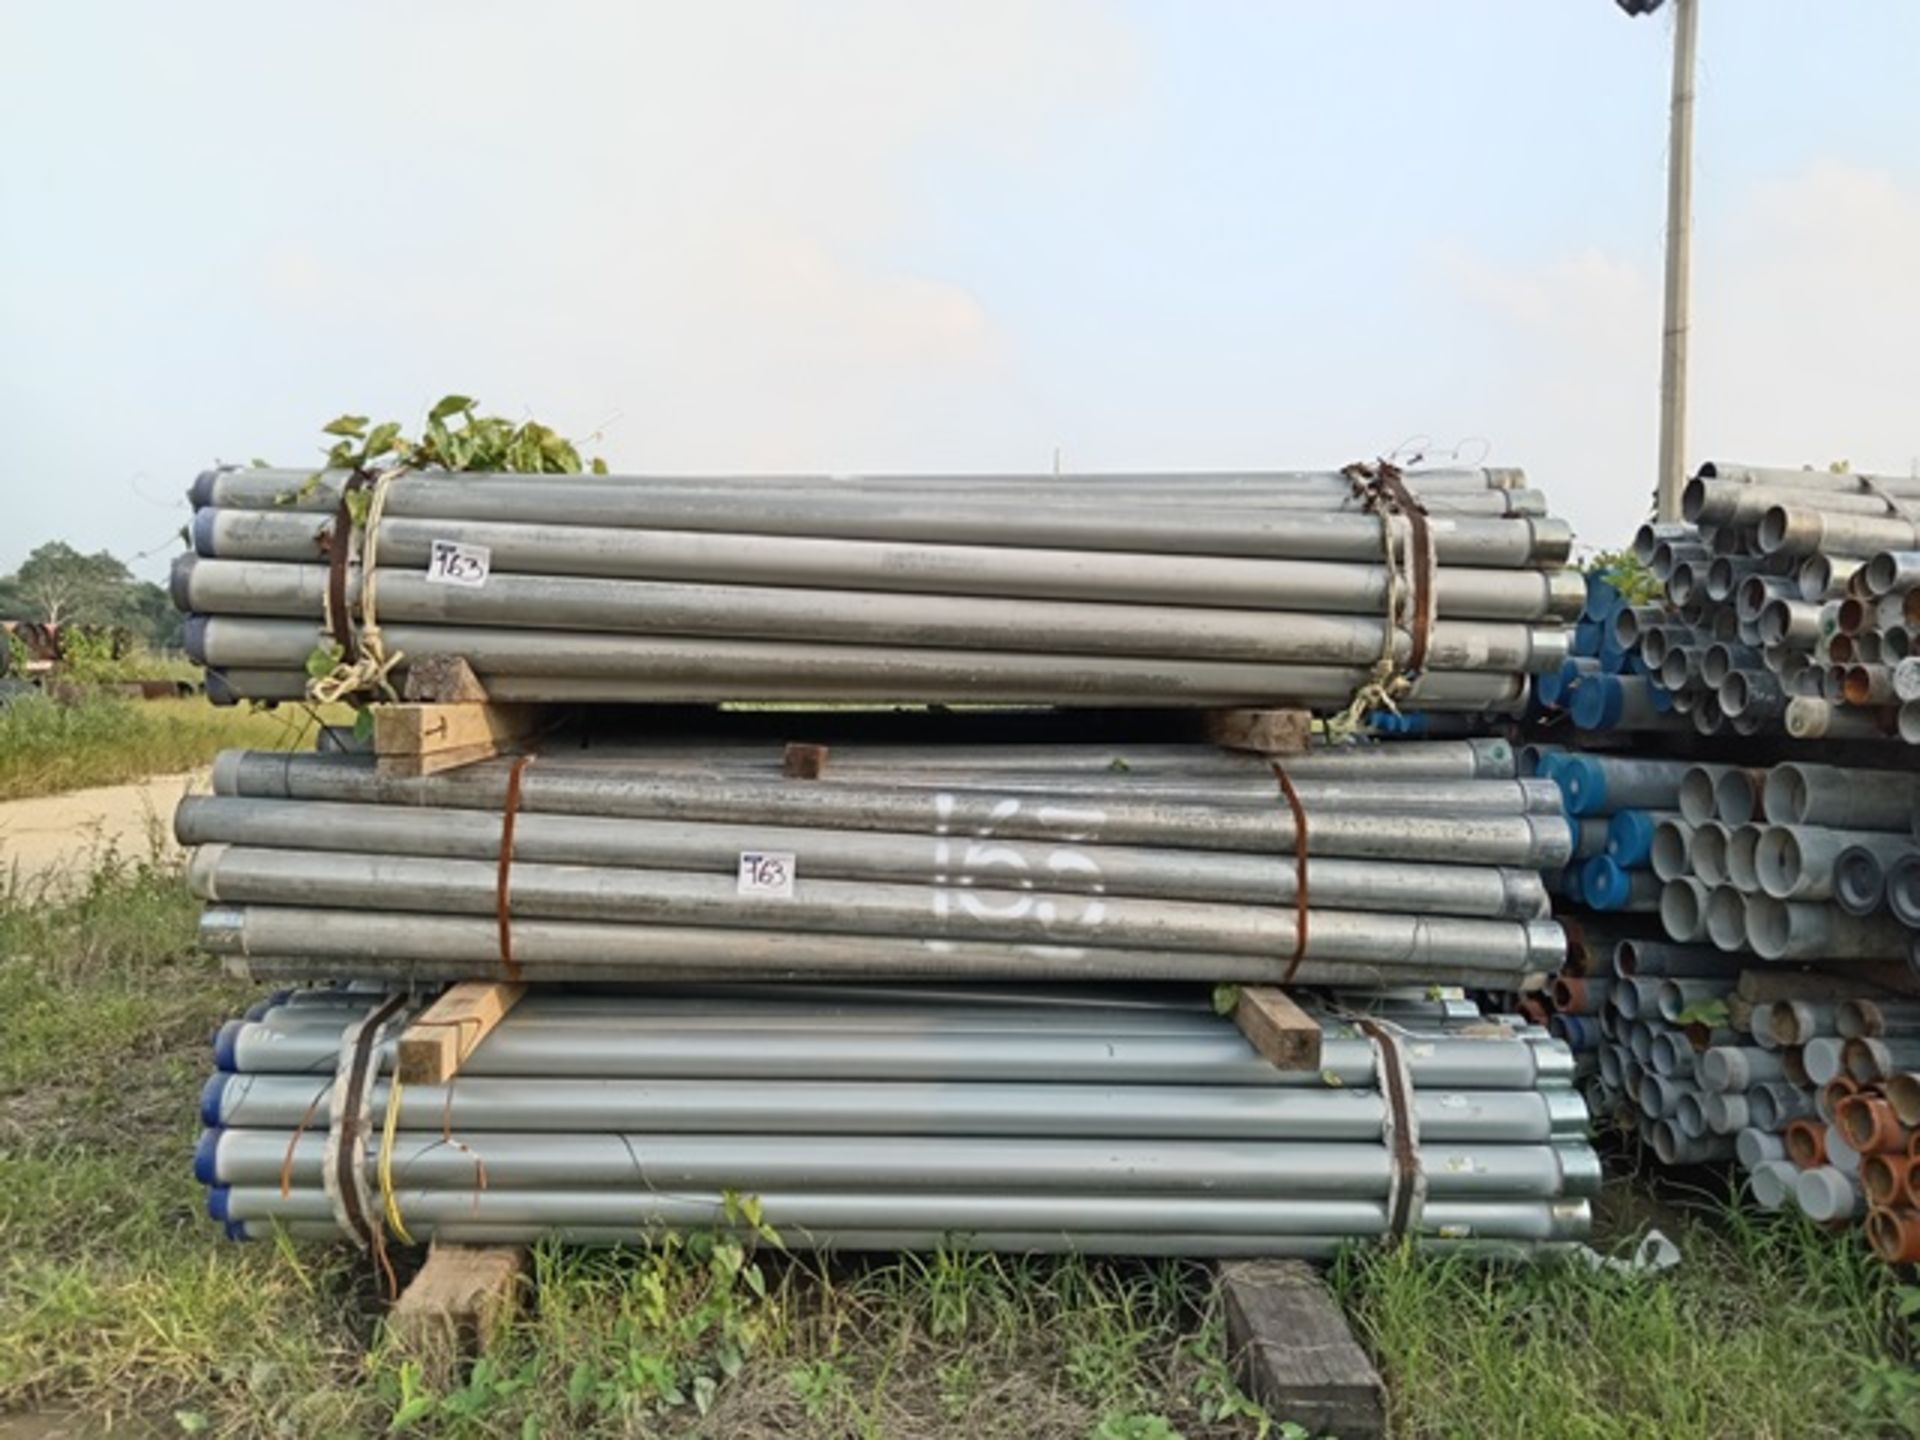 LOT OF 4375 METERS OF GALVANIZED CARBON STEEL PIPE WITH THREADED ENDS - Image 5 of 10